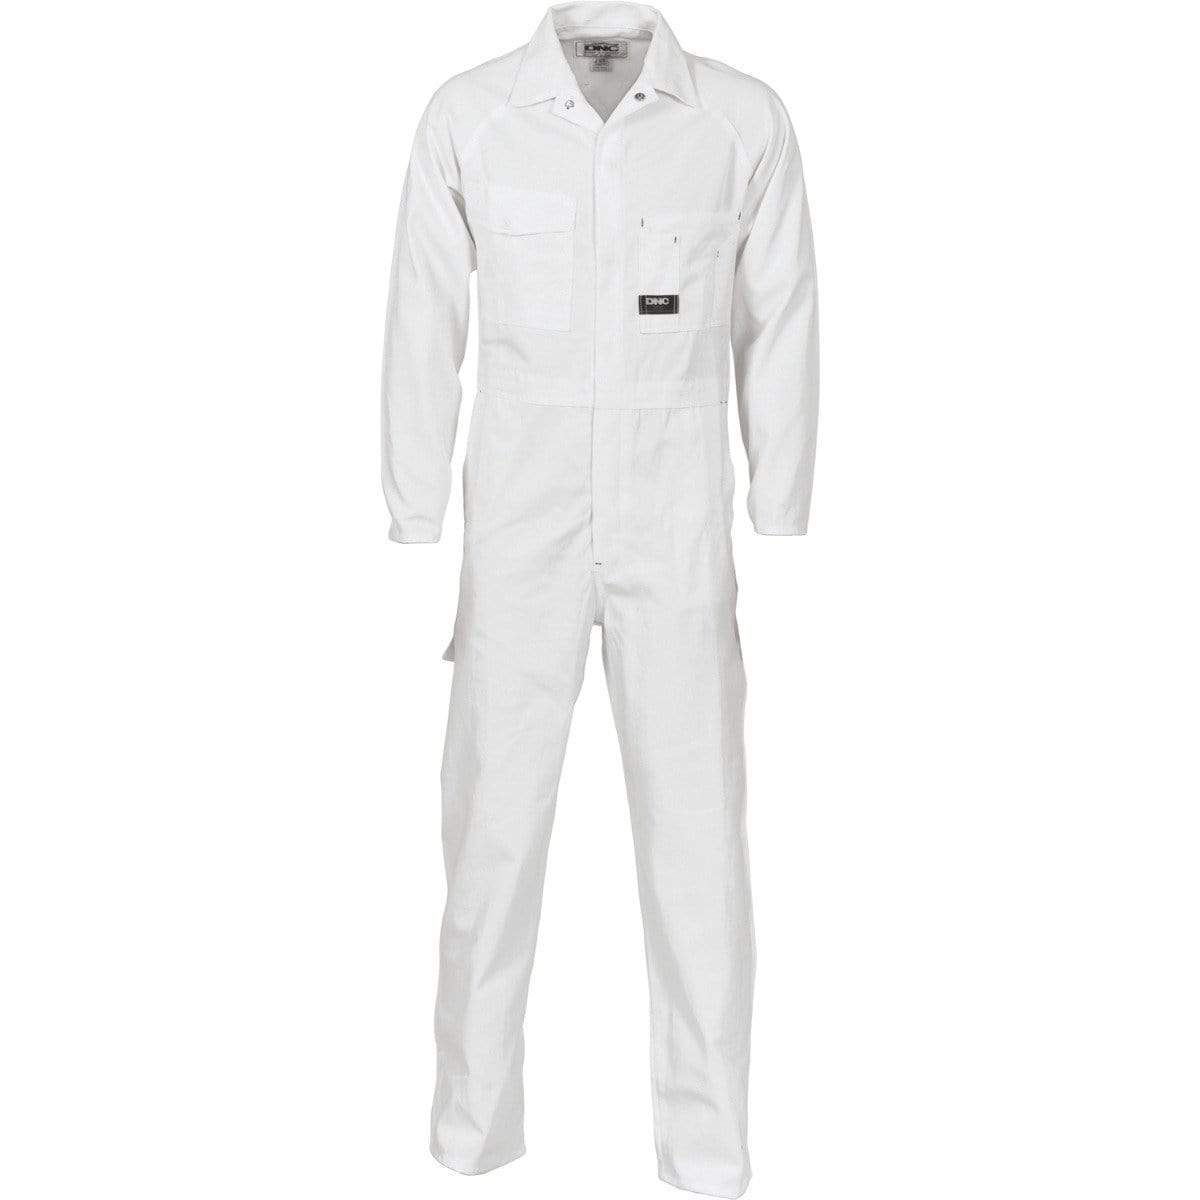 DNC Workwear Work Wear White / 77R DNC WORKWEAR Cotton Drill Coverall 3101